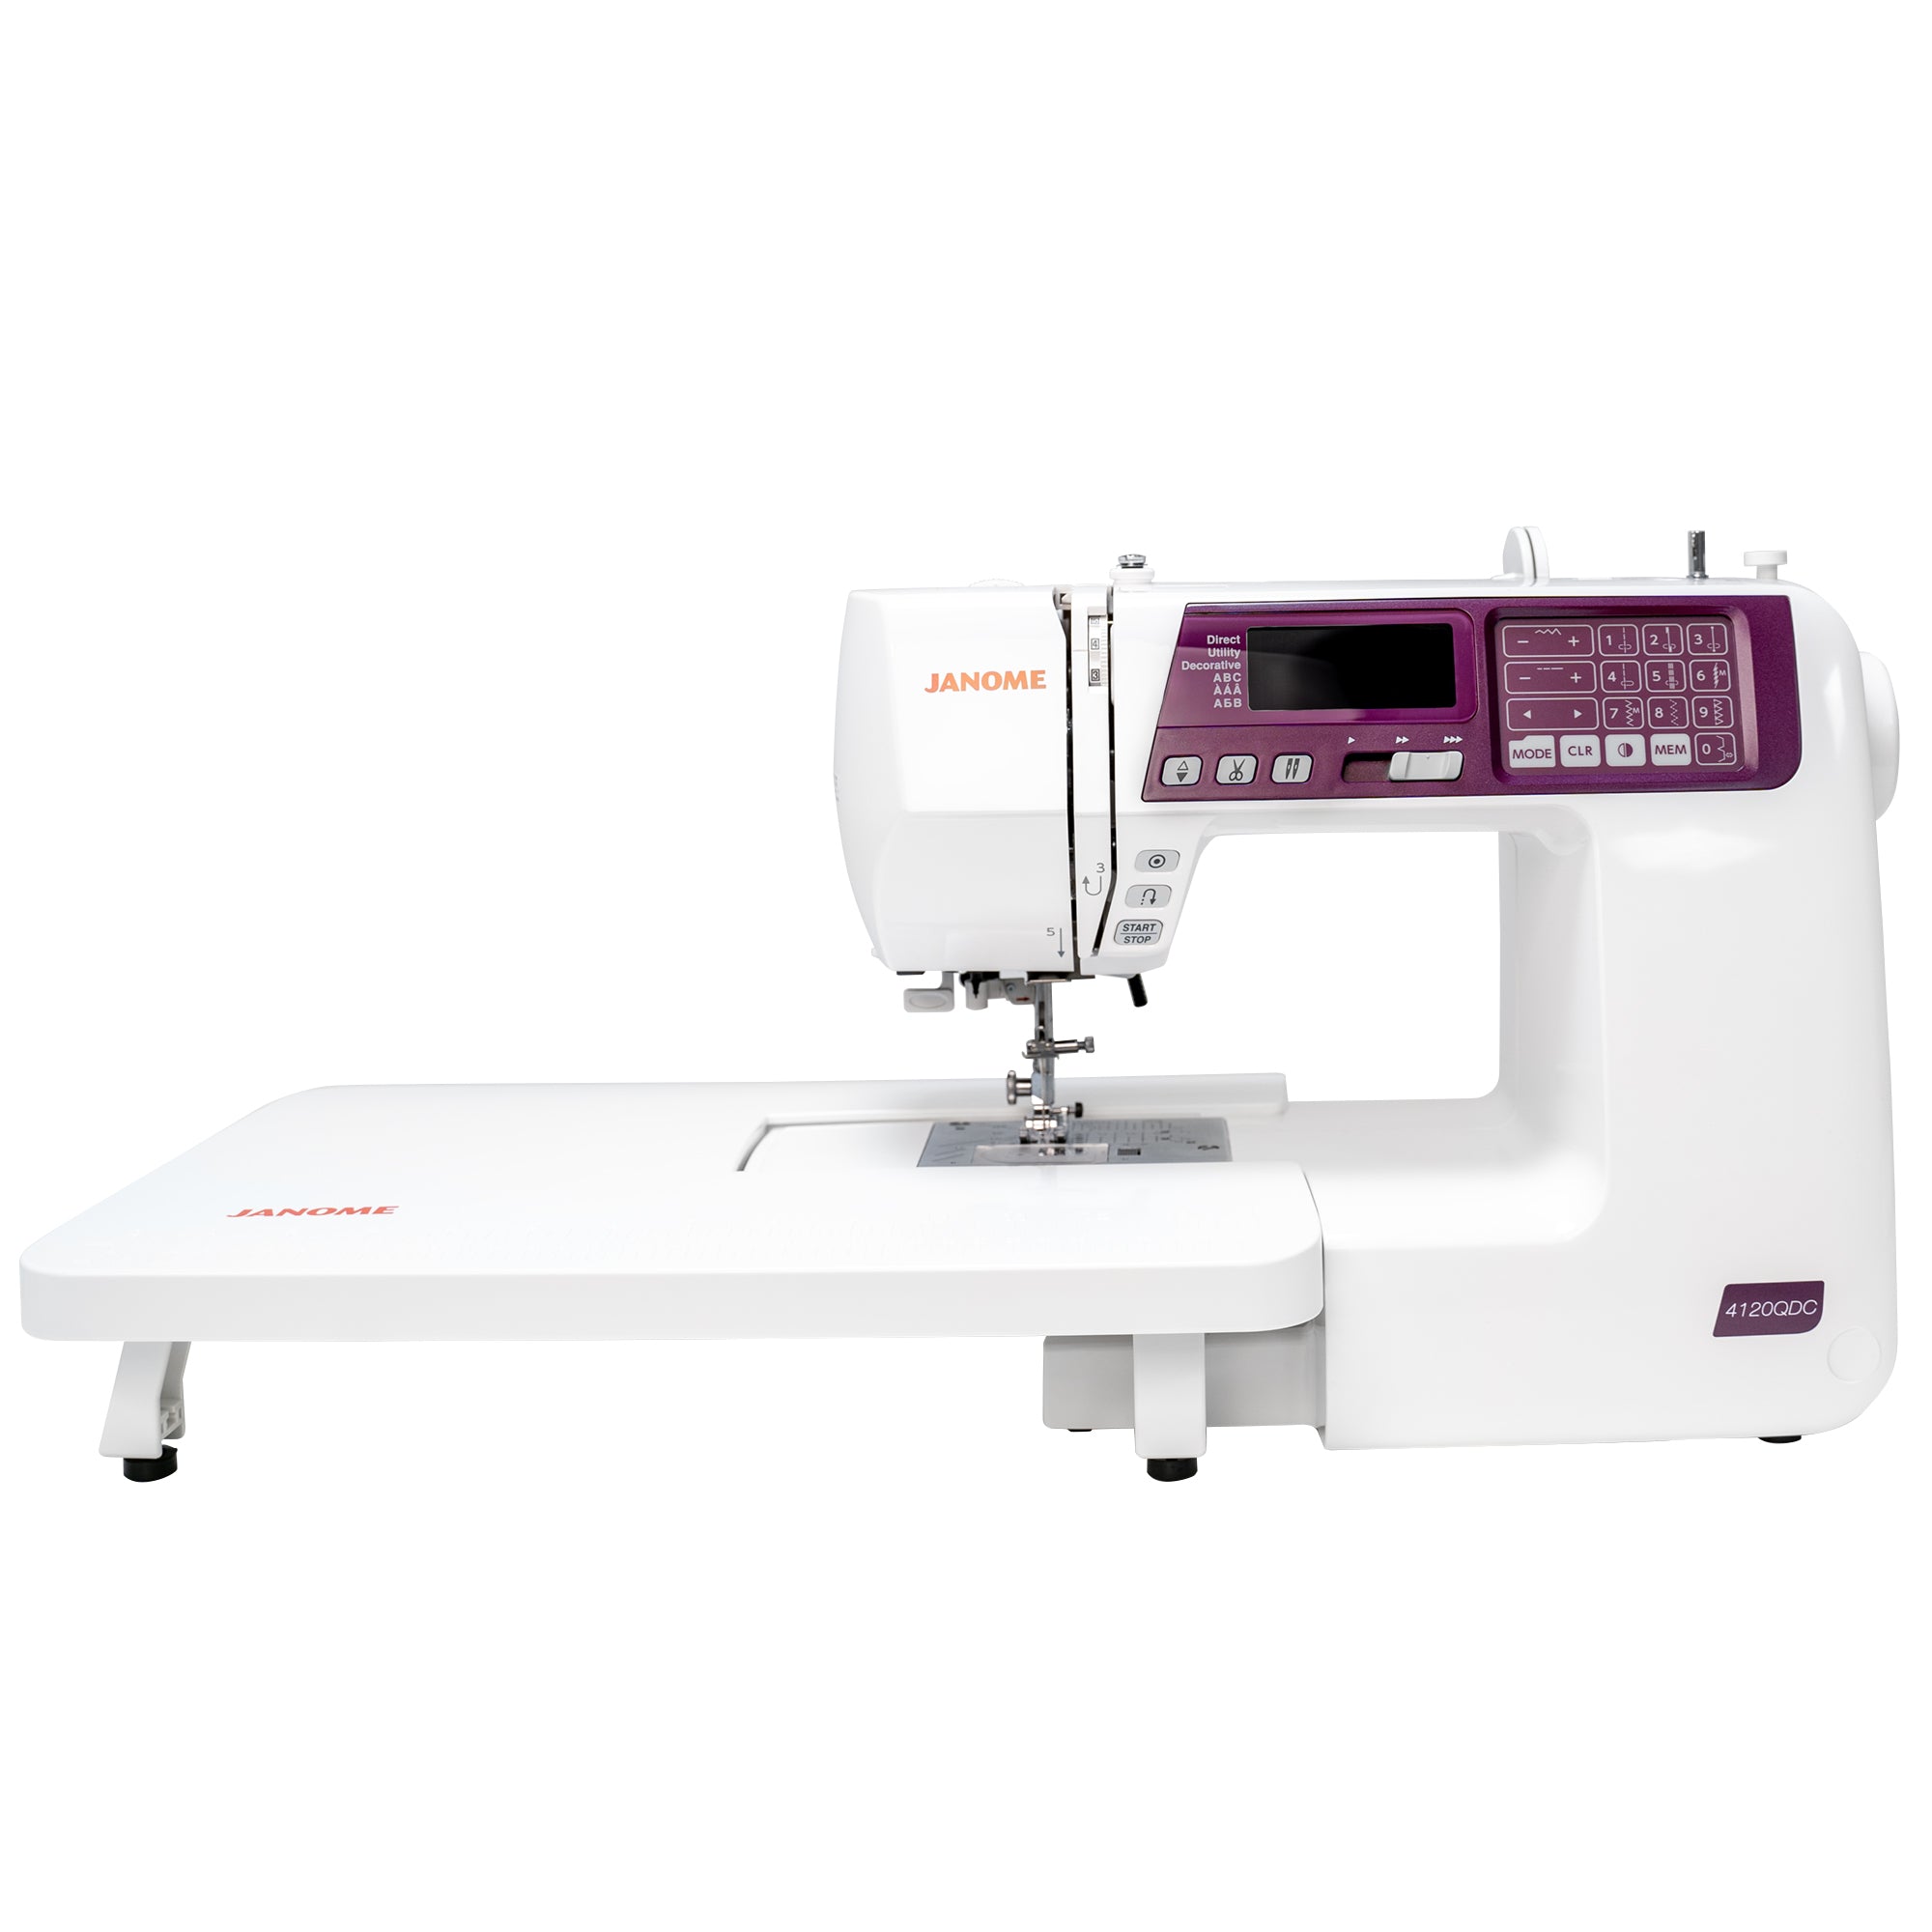 front facing image of the Janome 4120QDC-G Sewing and Quilting Machine with the extension table